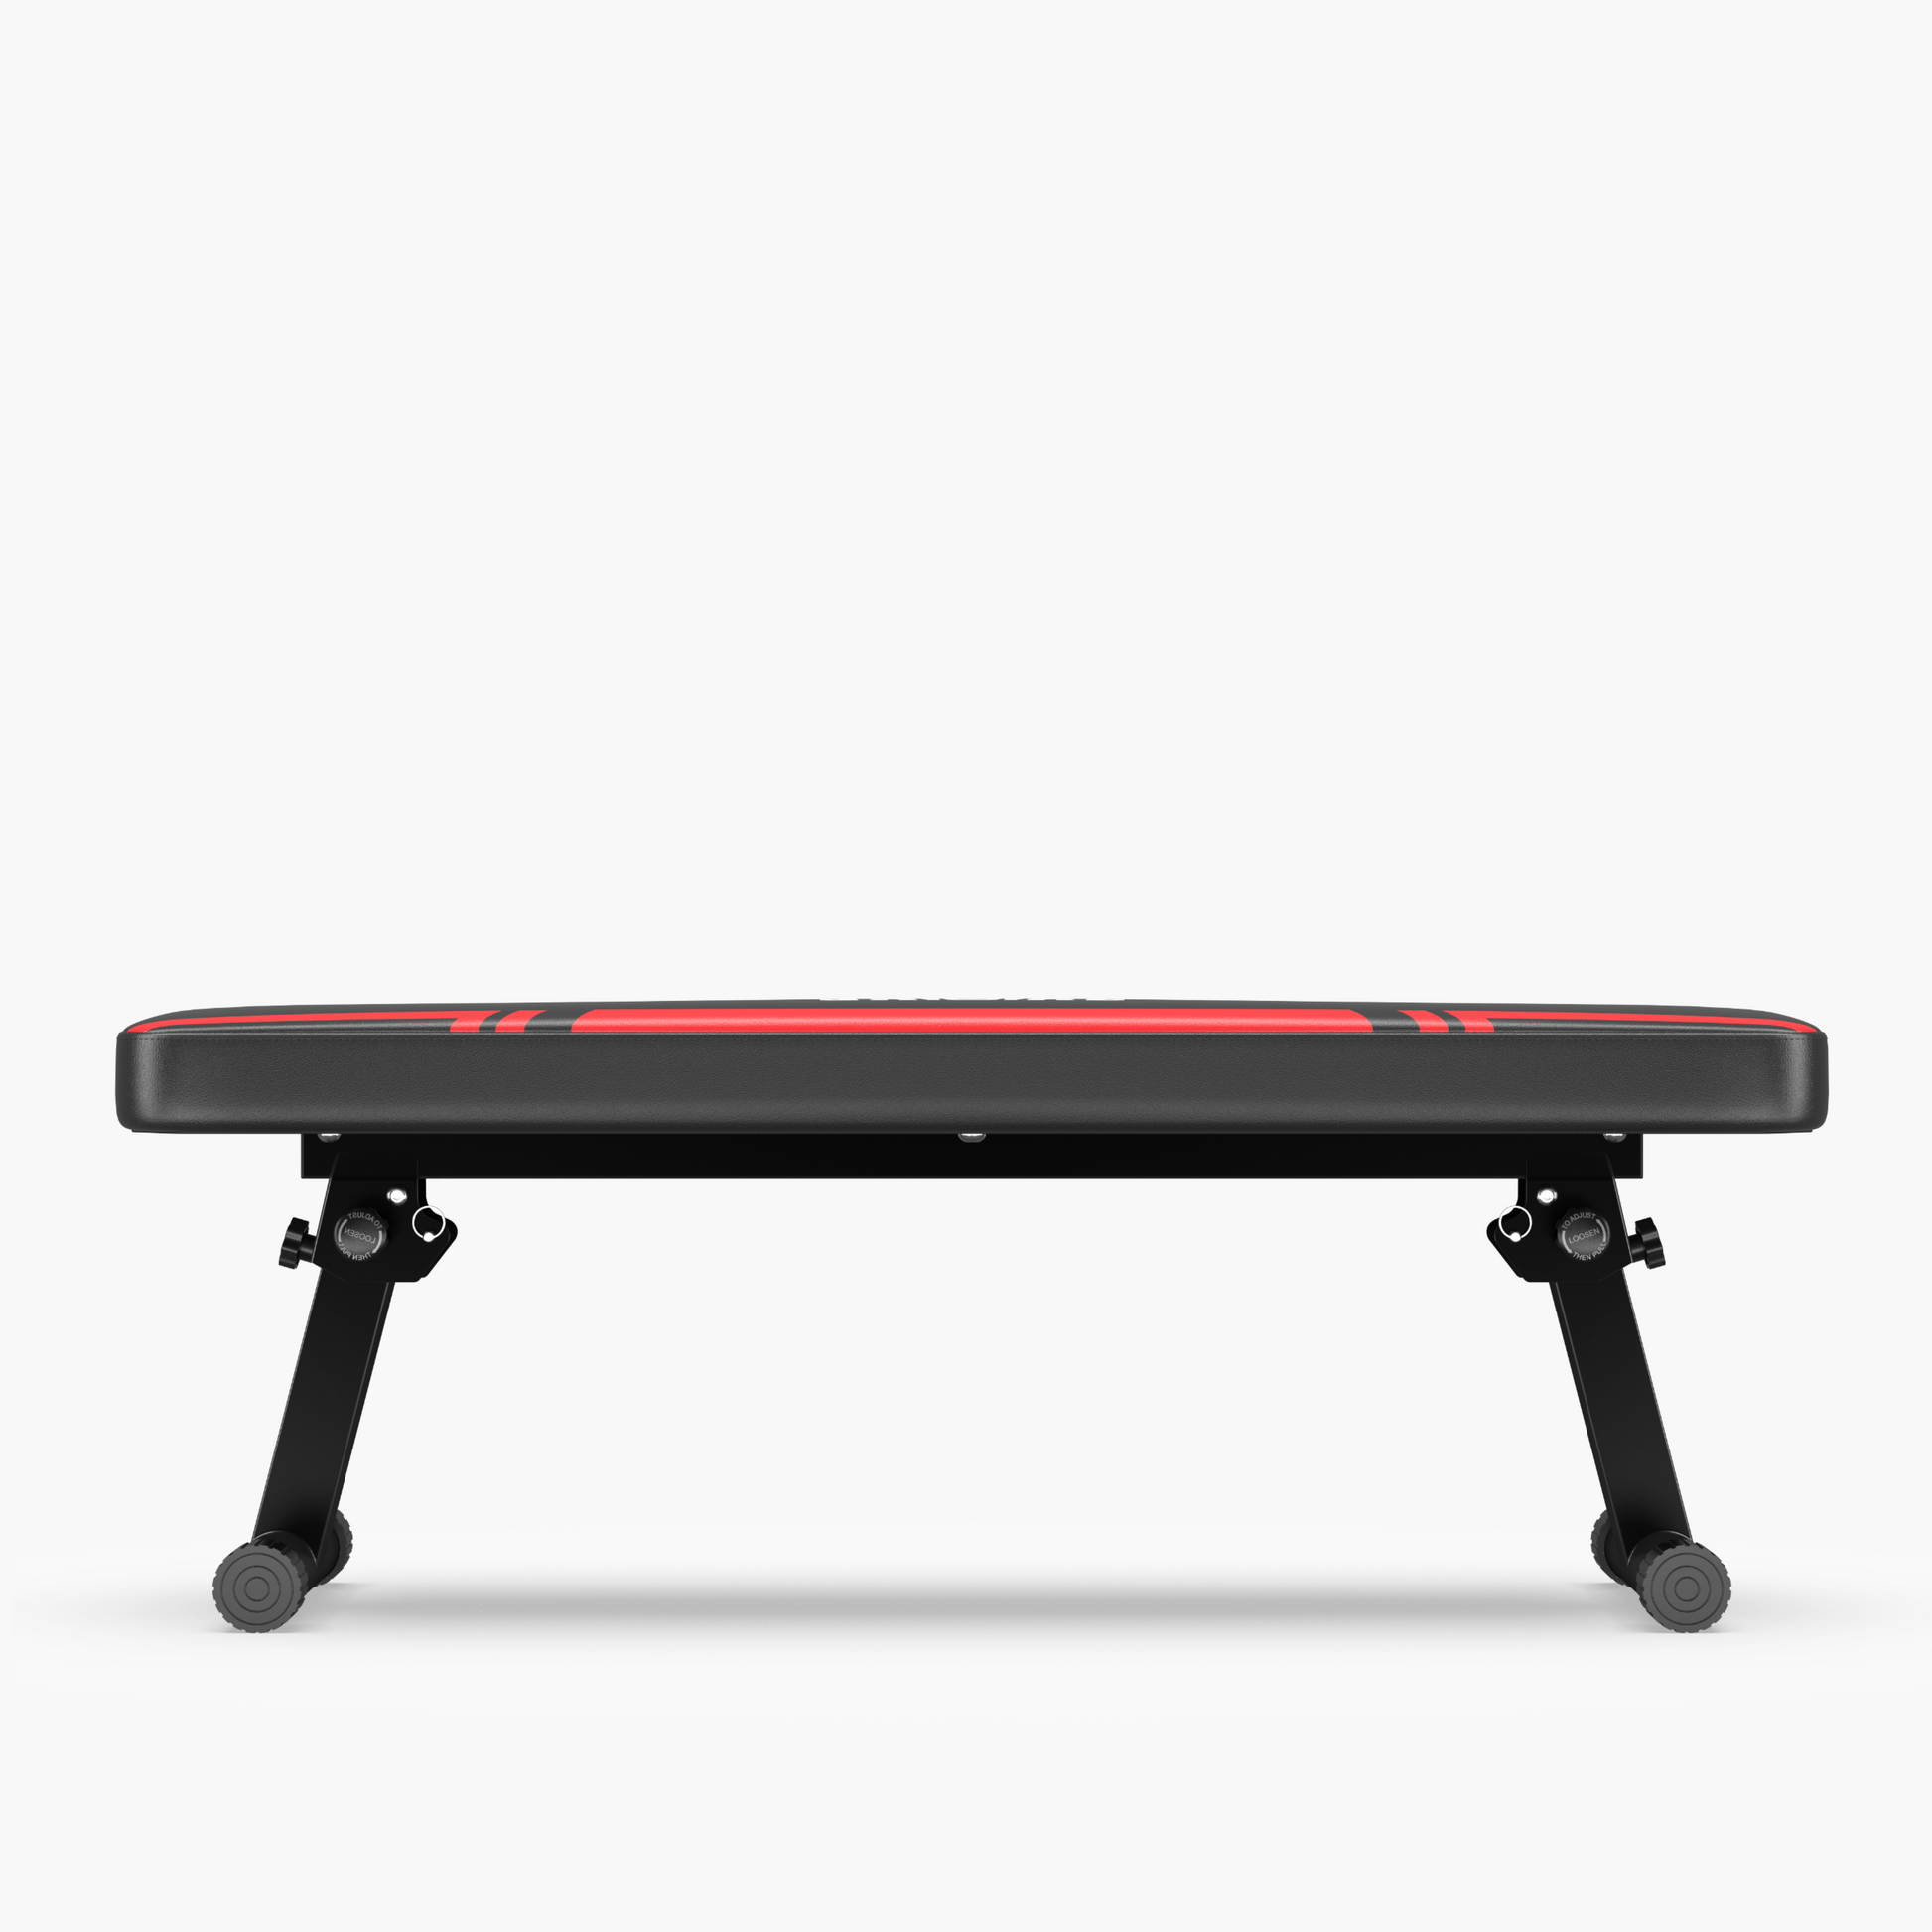 FLYBIRD Adjustable Bench, Multi-Purpose Foldable Incline Bench (Black) -  sporting goods - by owner - sale - craigslist